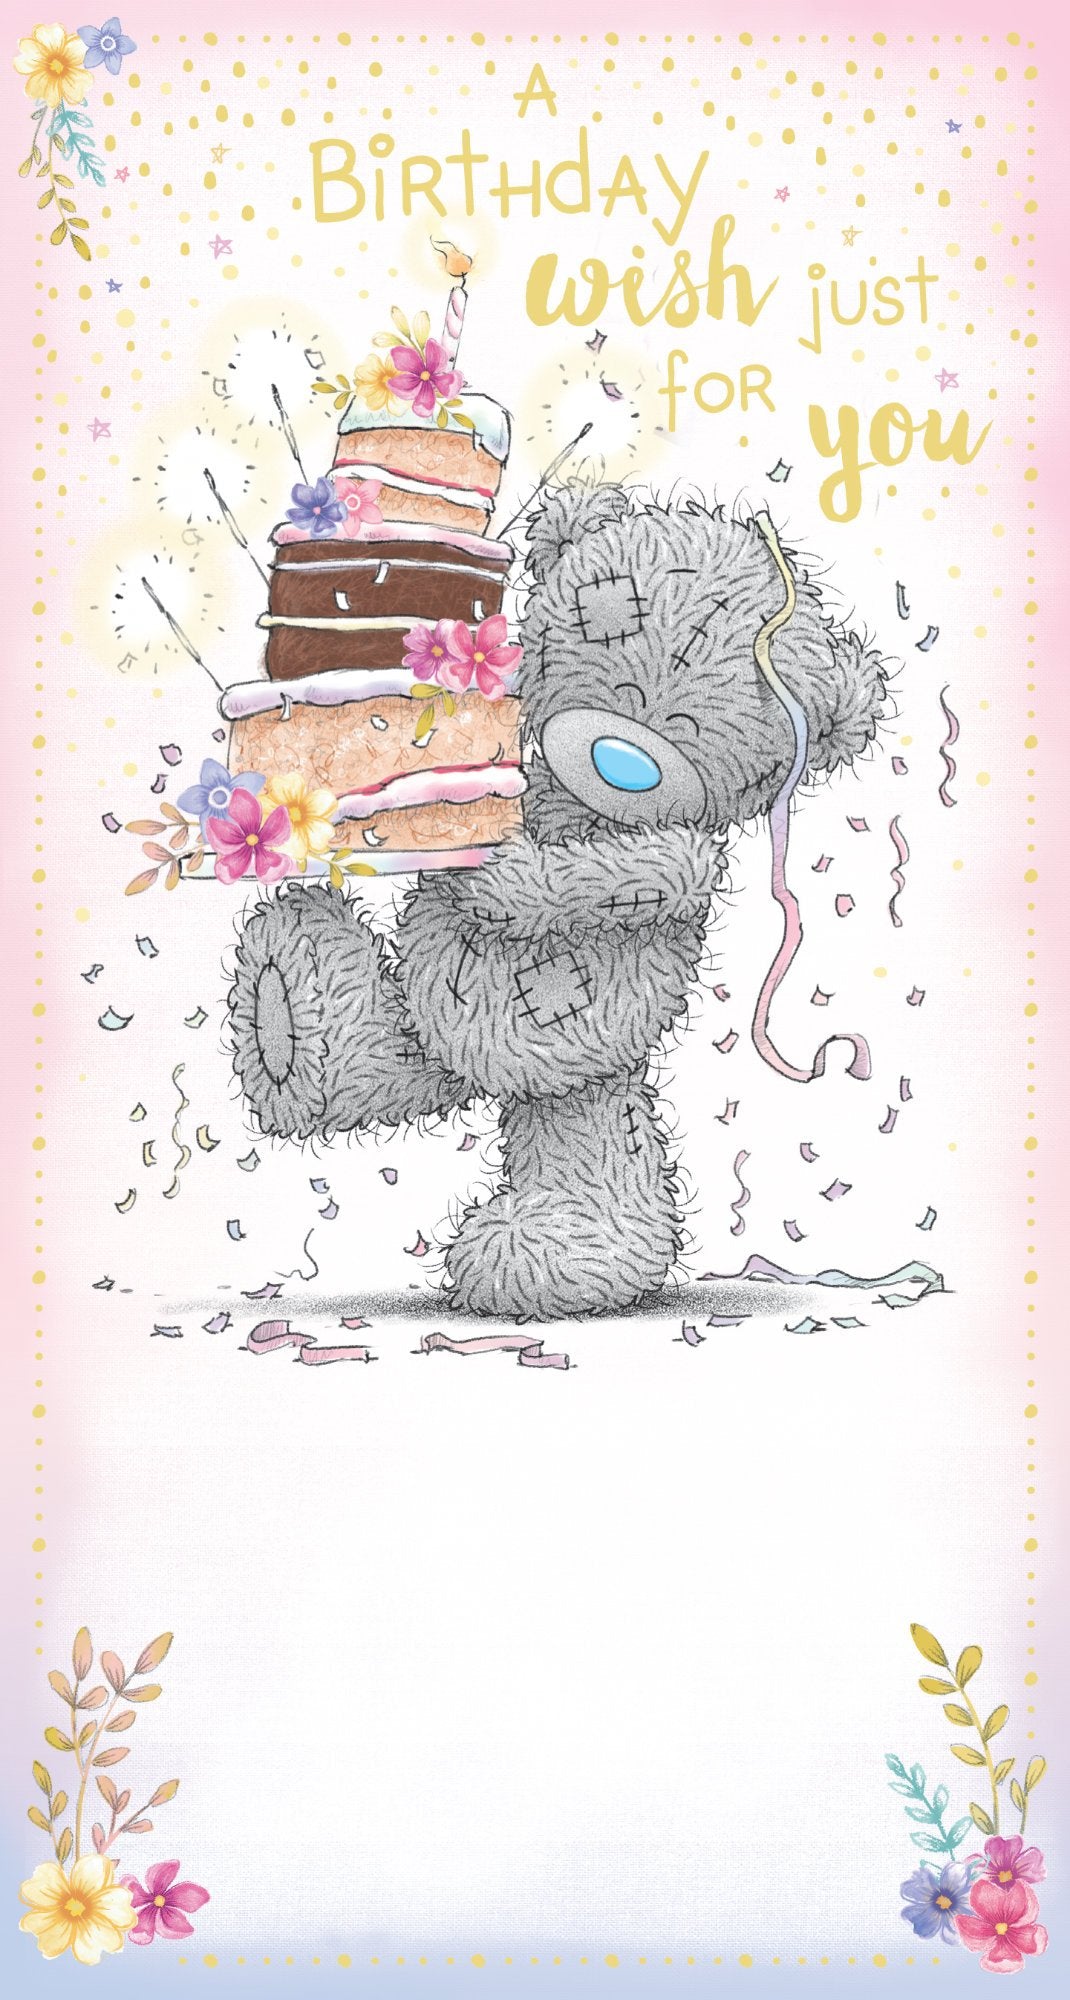 Photograph of Open Birthday Bear Holding Cakes Greetings Card at Nicole's Shop